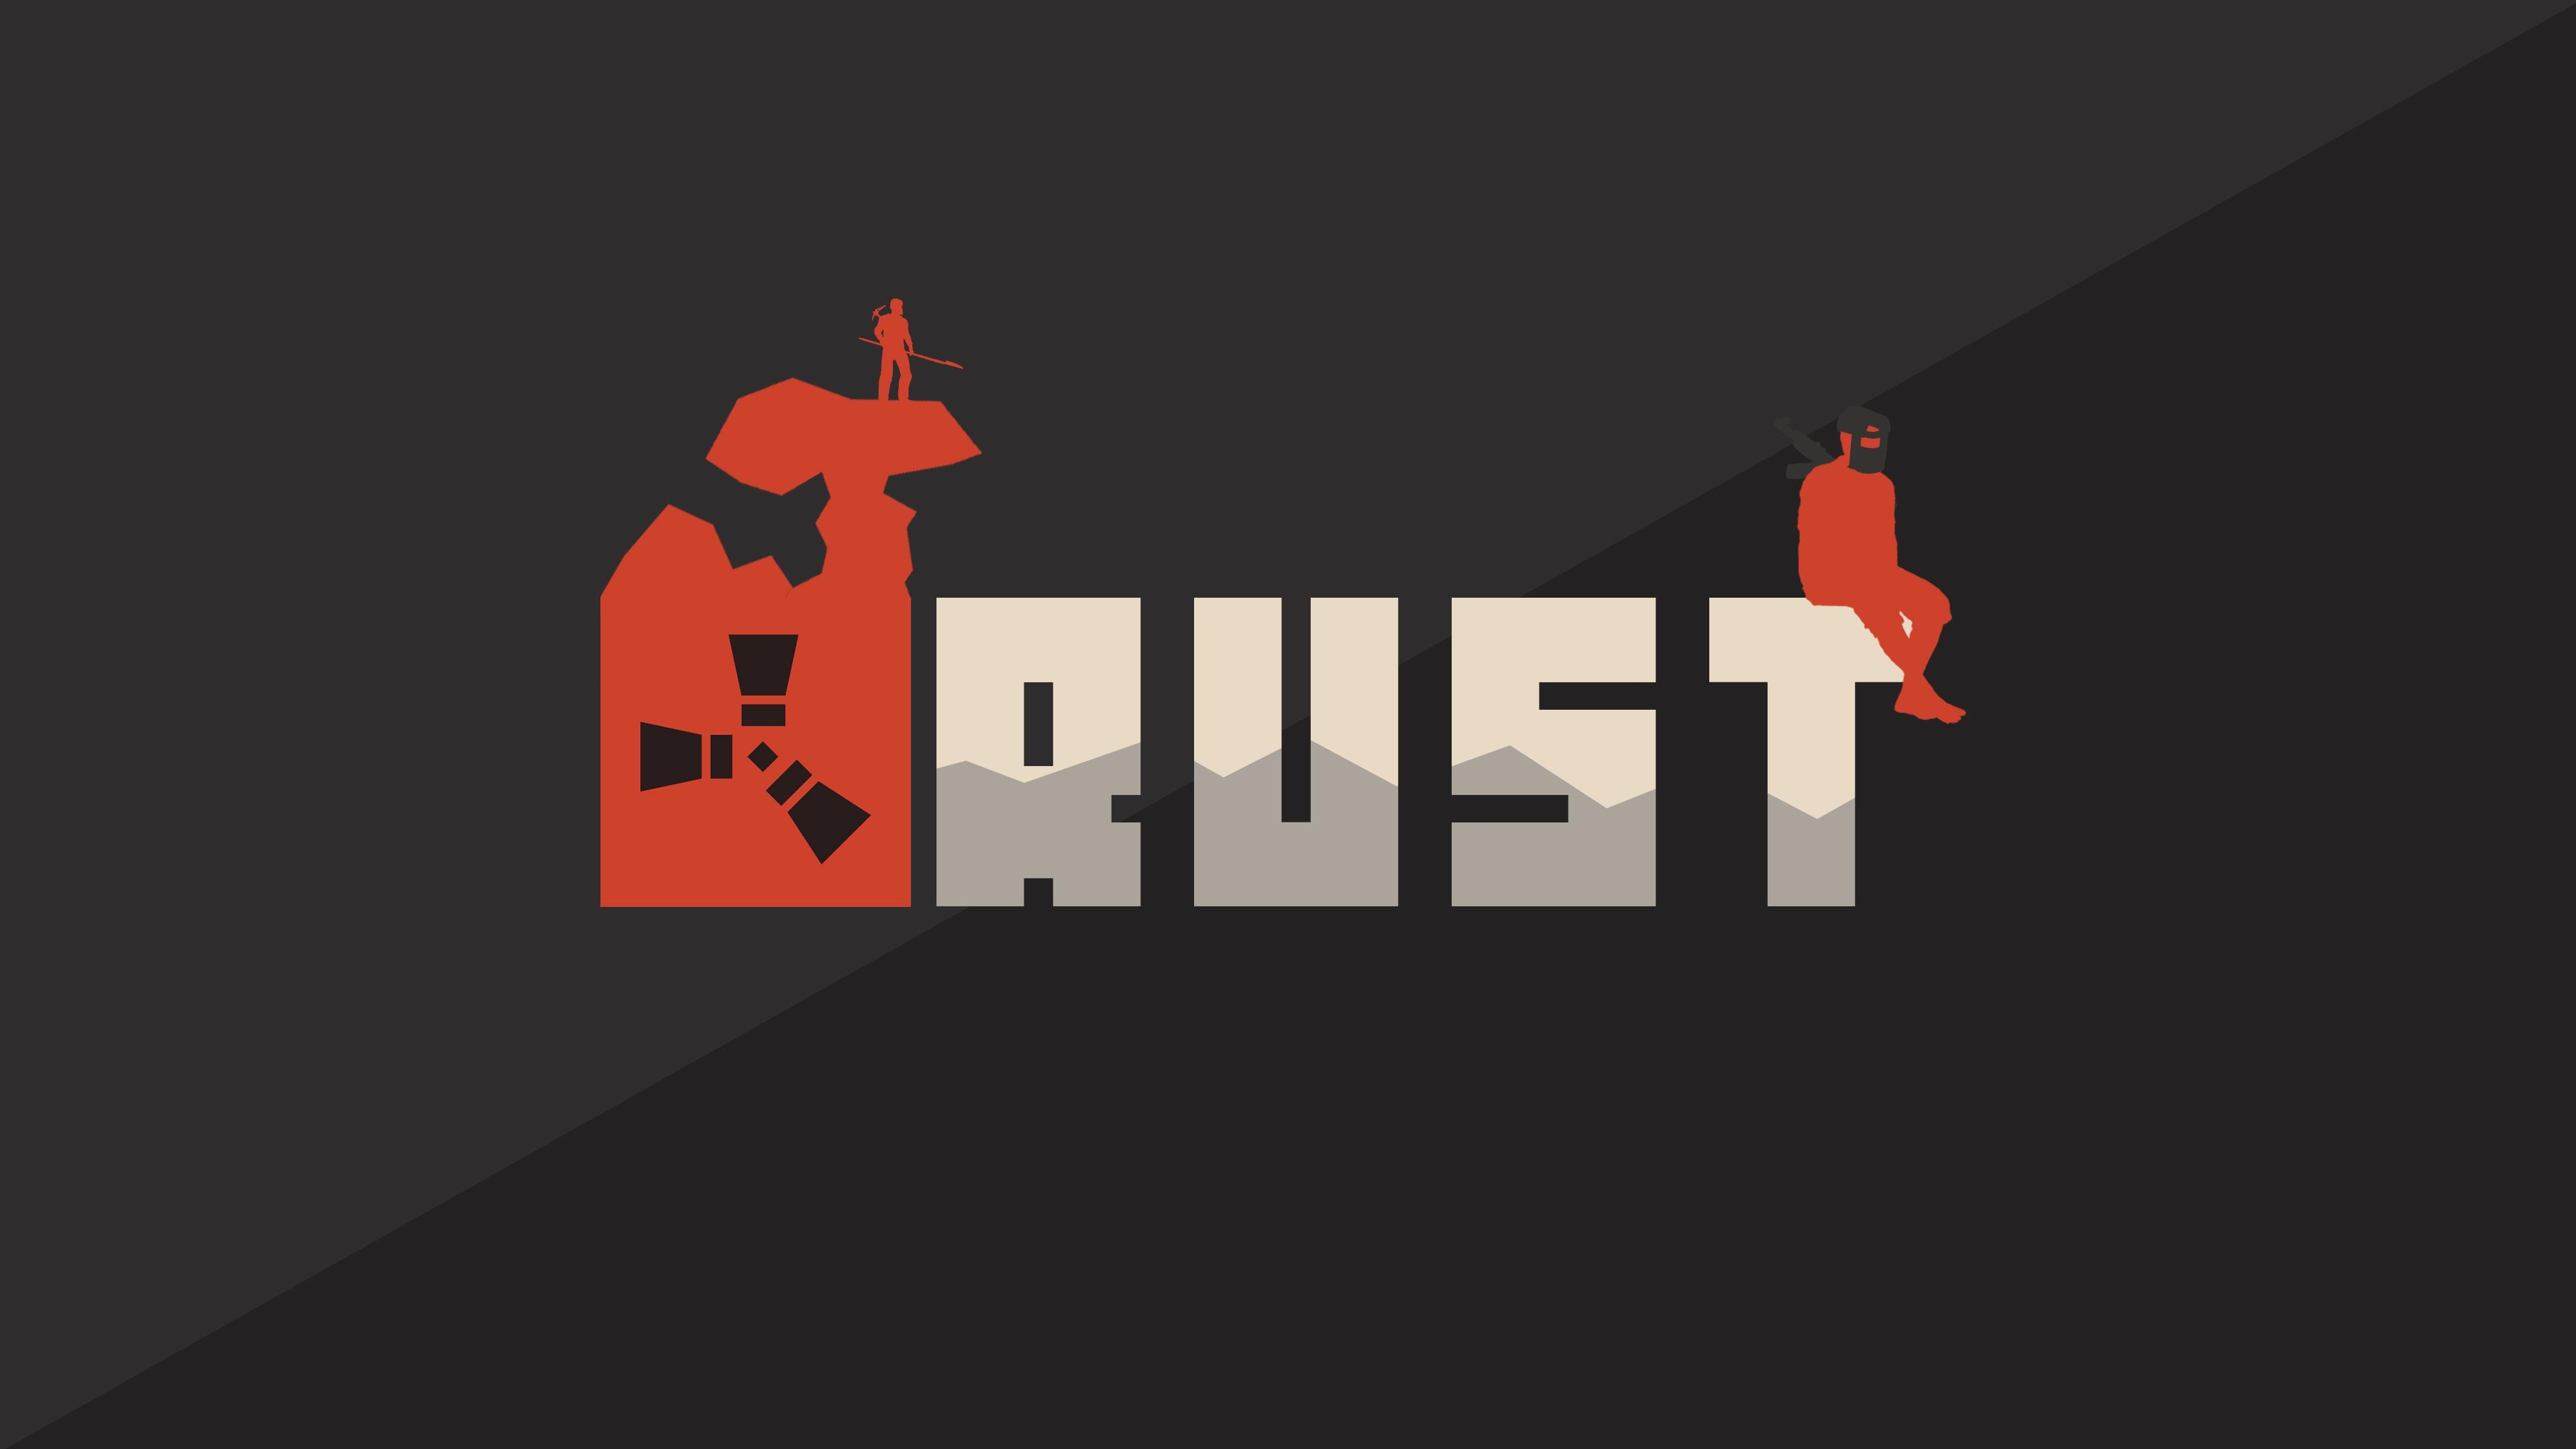 Name for rust фото 99